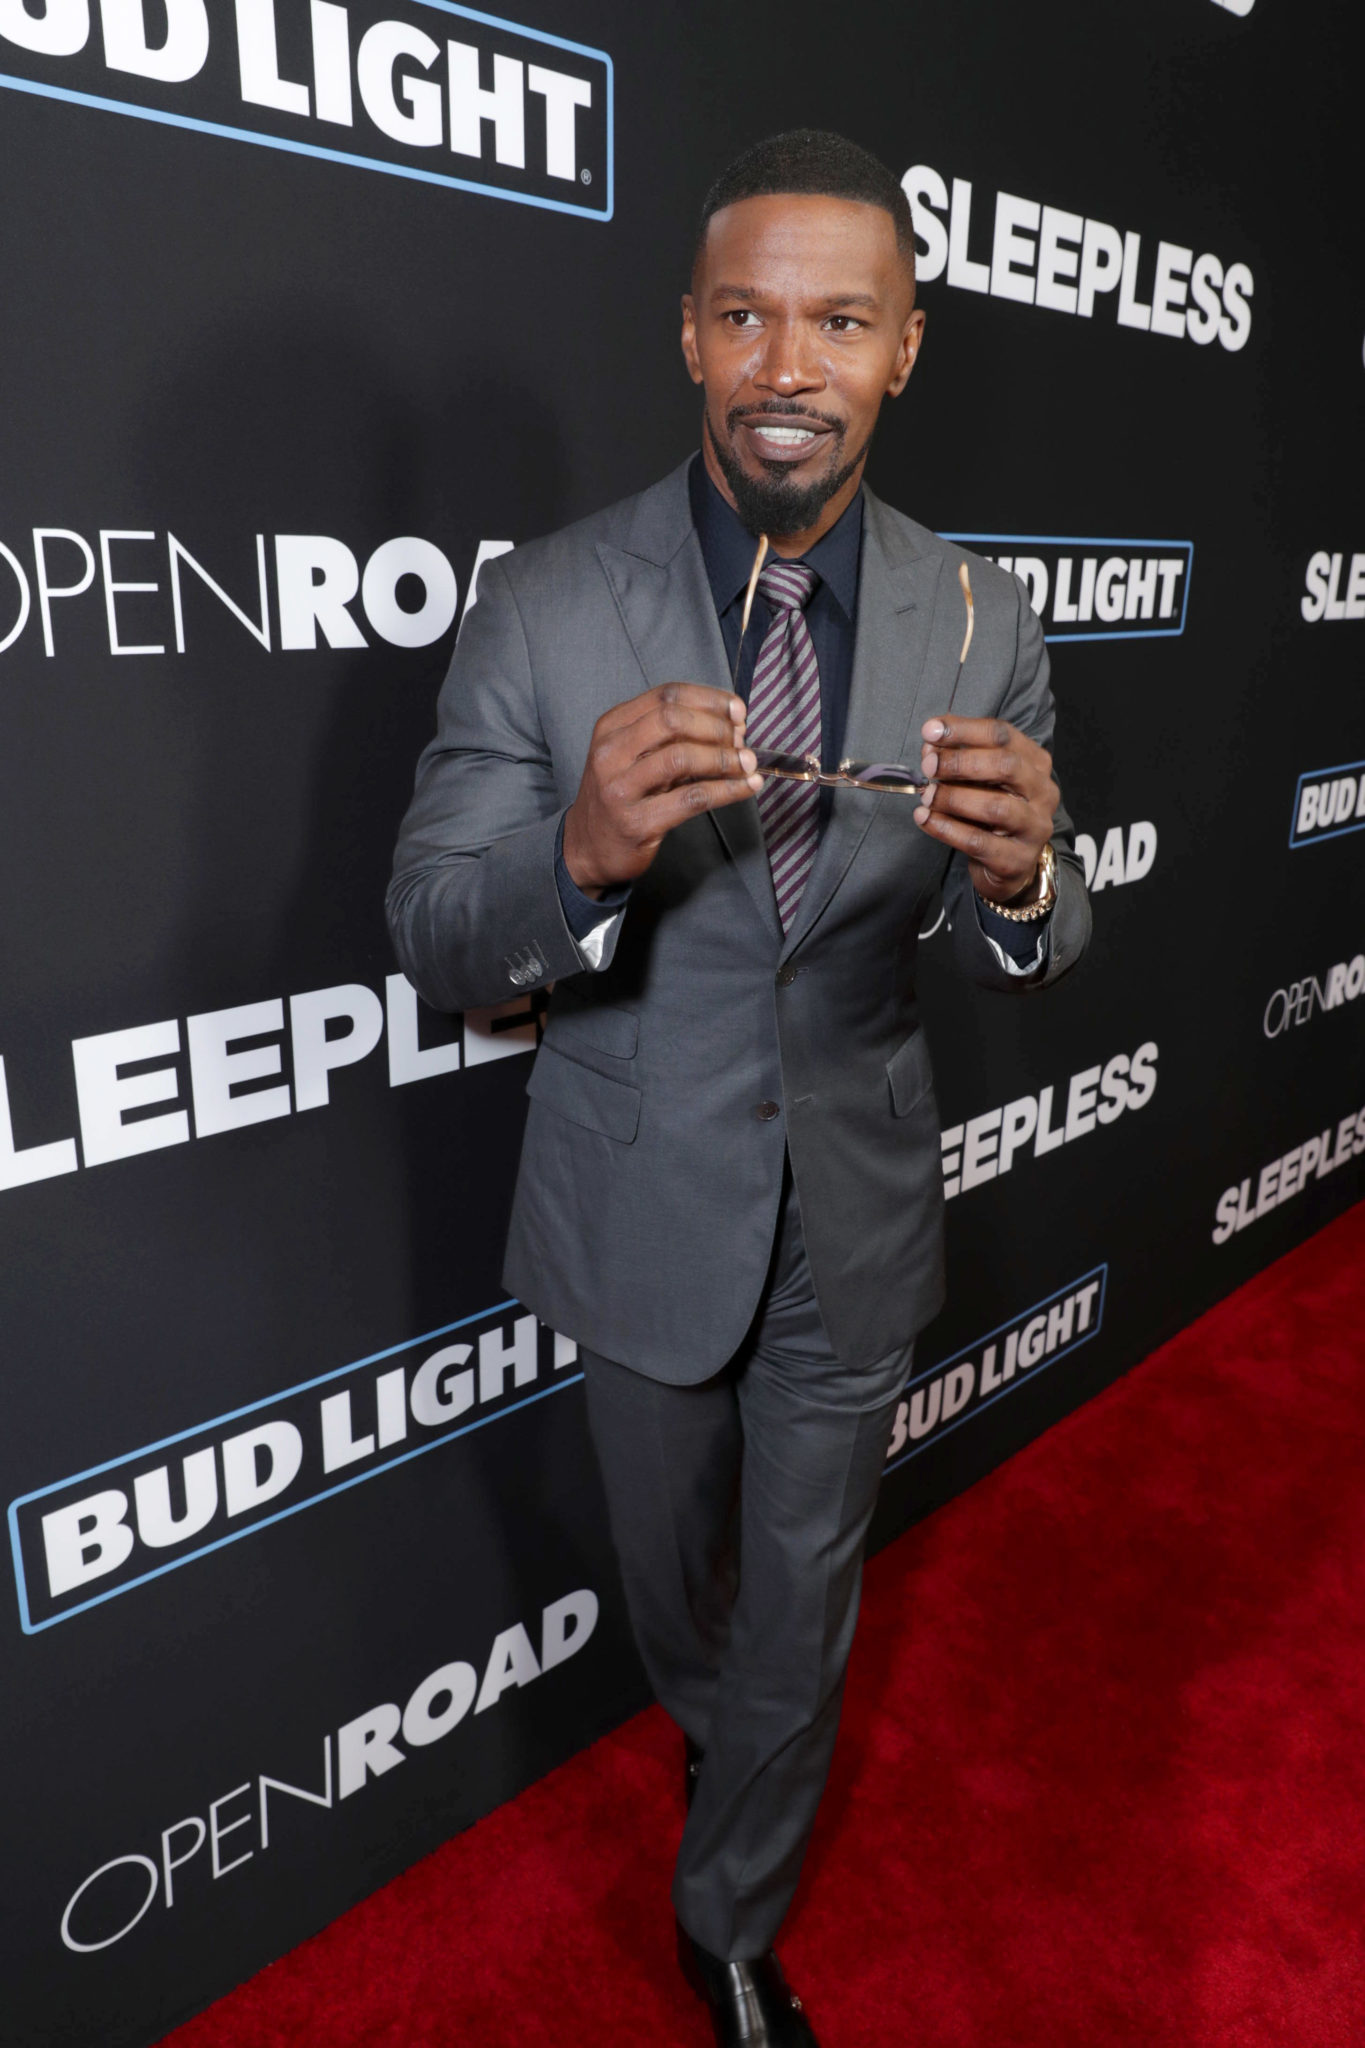 Sleepless Red Carpet Premiere In Hollywood